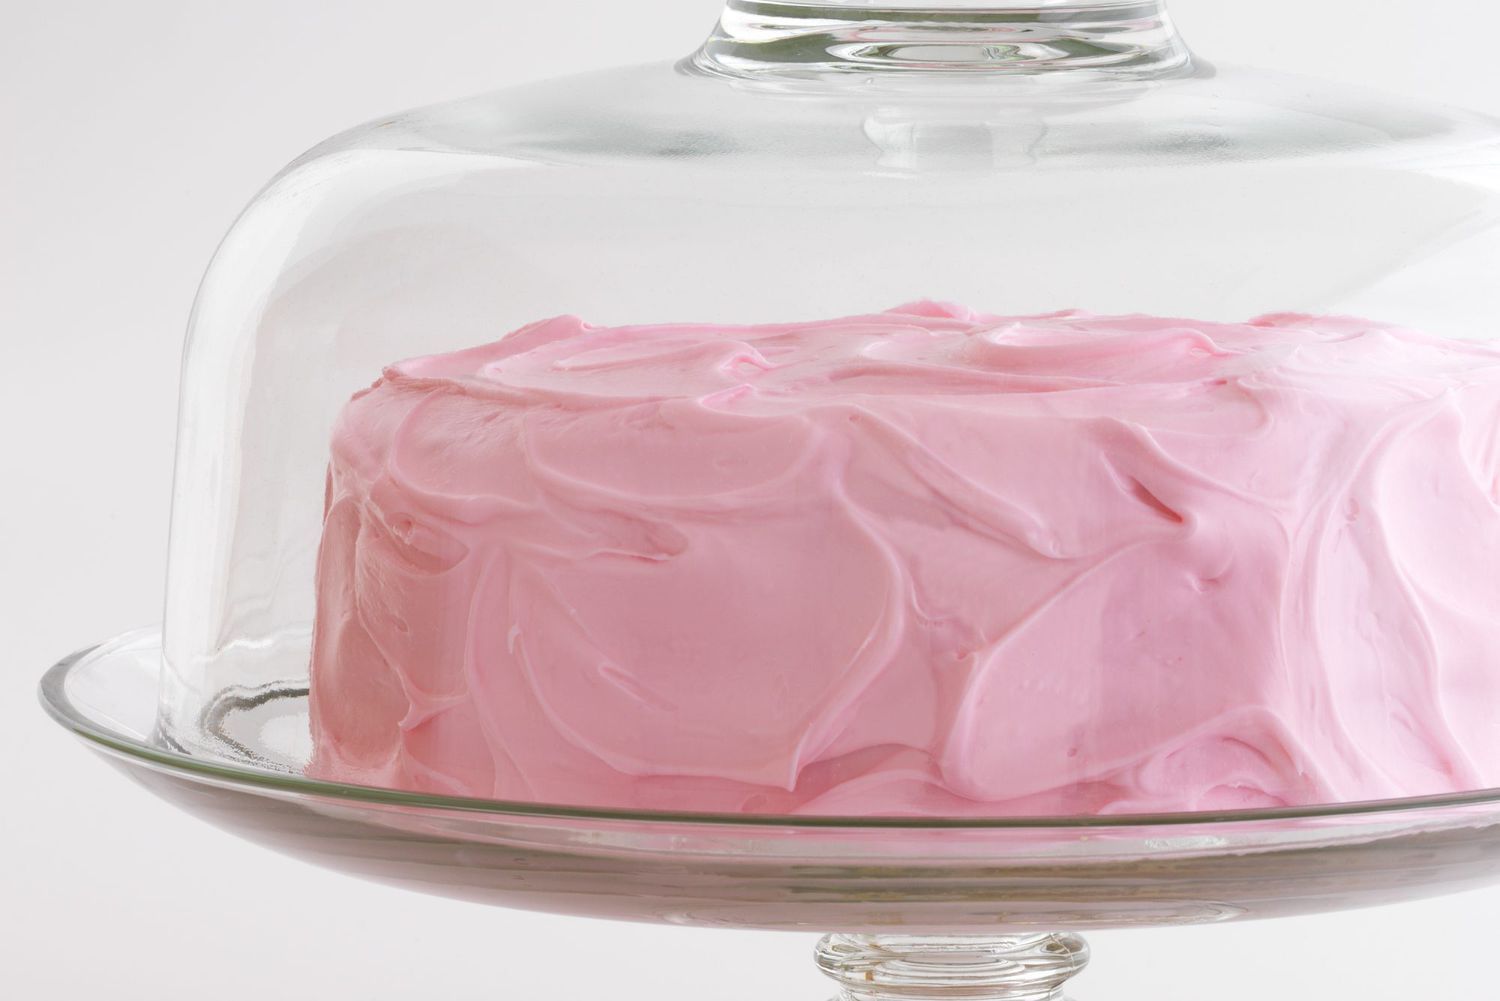 How To Store A Cake Overnight Without Plastic Wrap